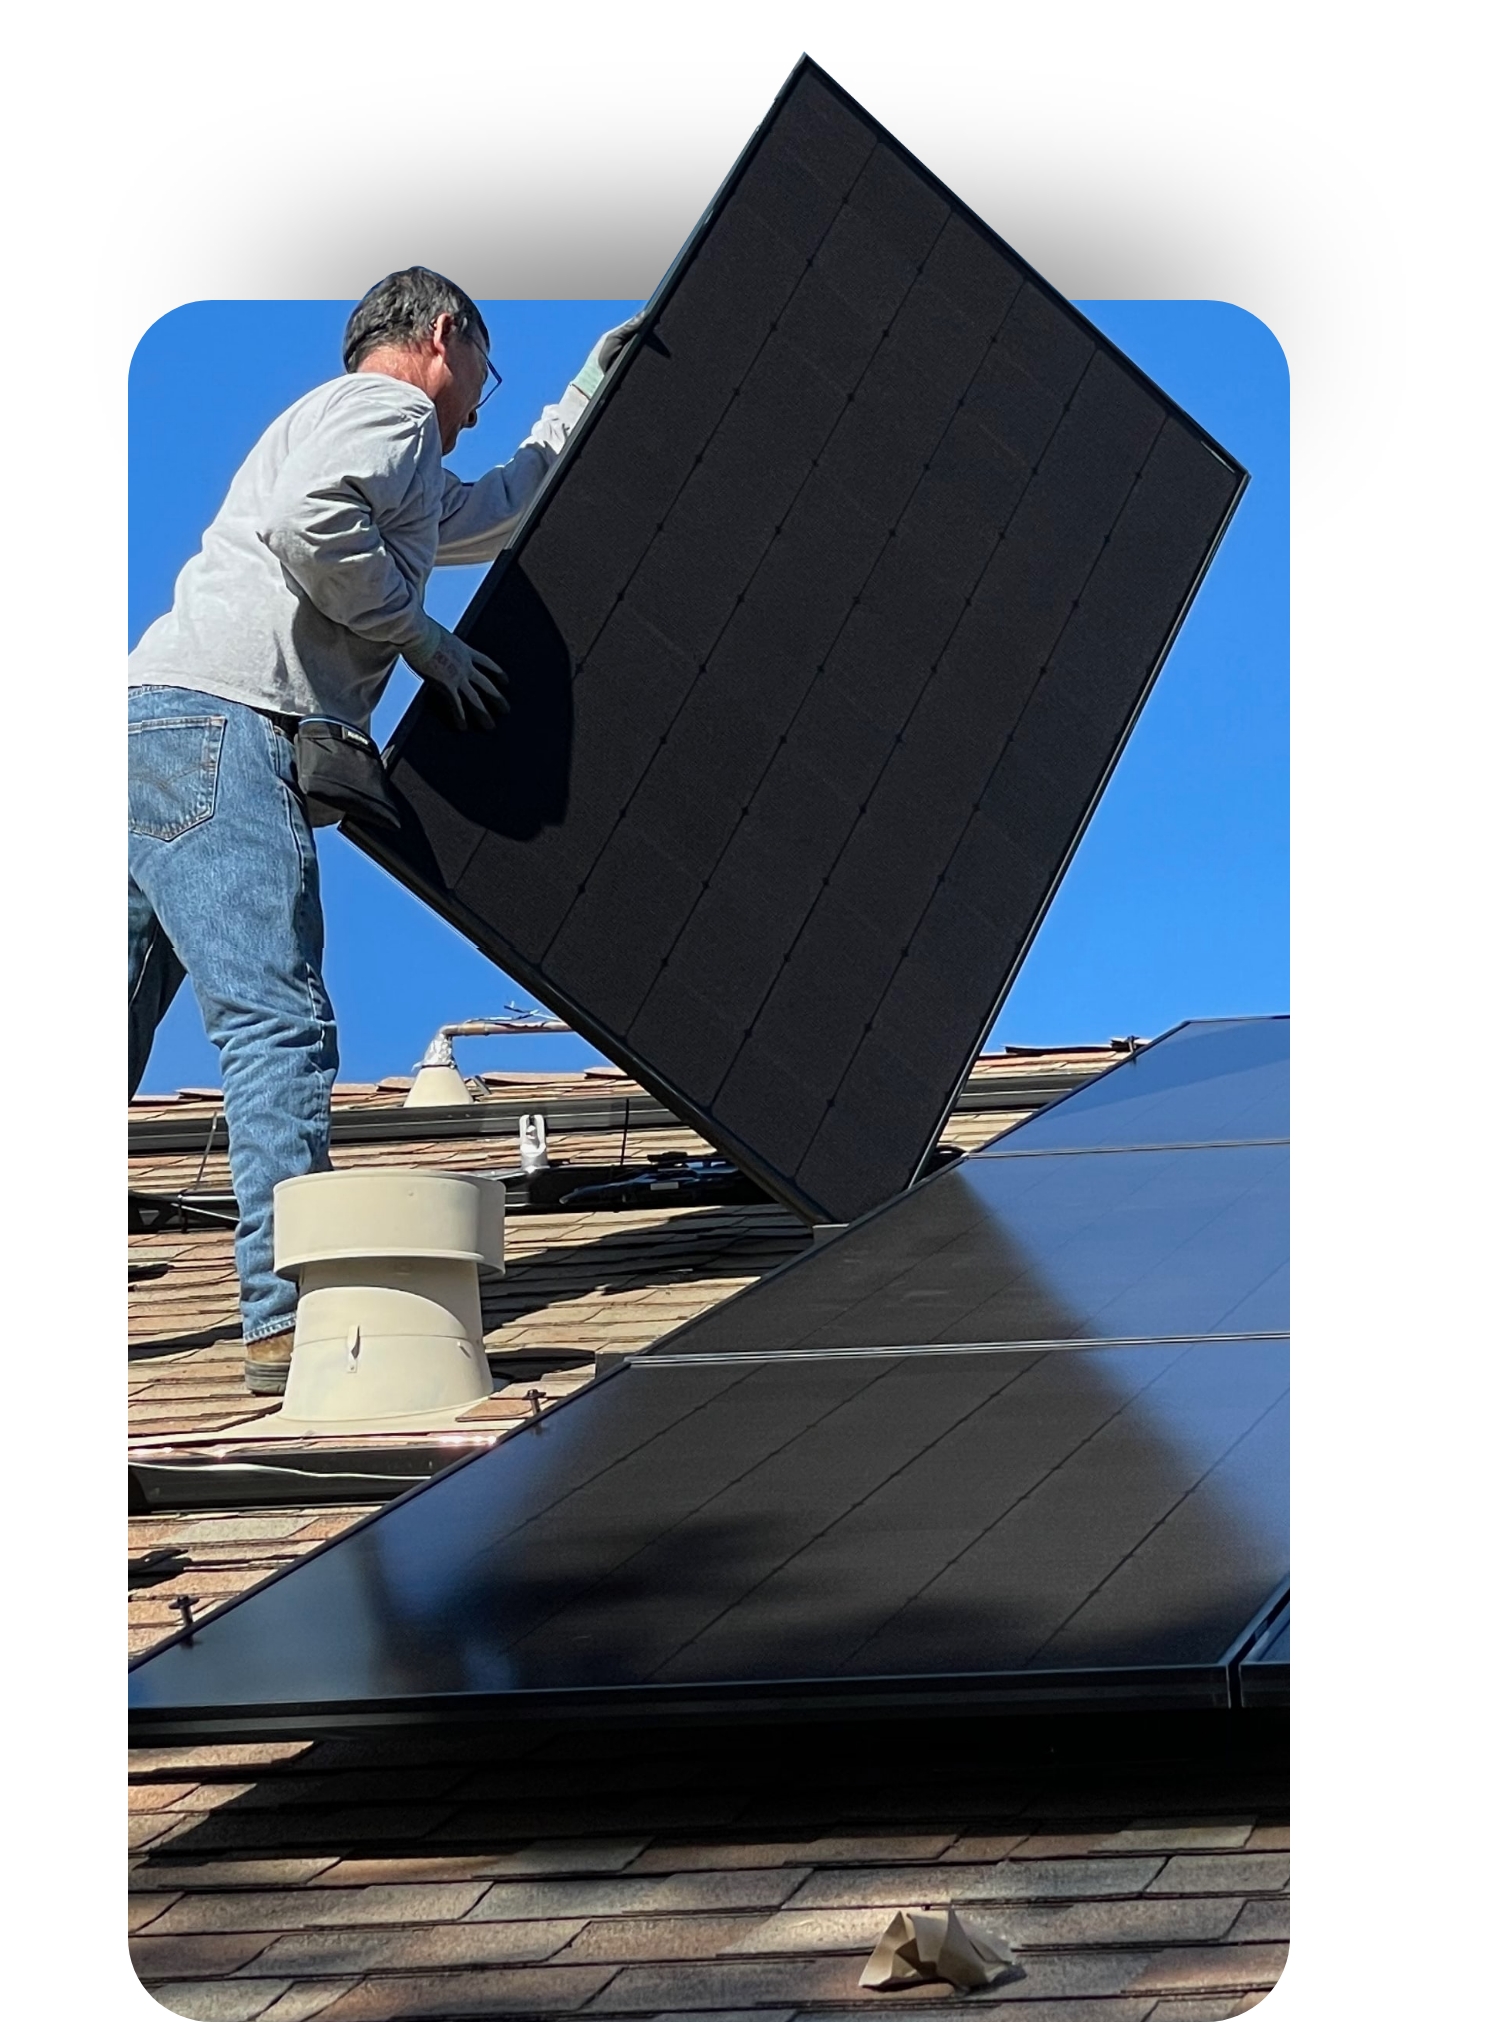 Choose Solar by Peak to Peak to install a solar system at your home. As the best local solar company in Denver, CO, get your solar panels installed correctly without compromising your roof.